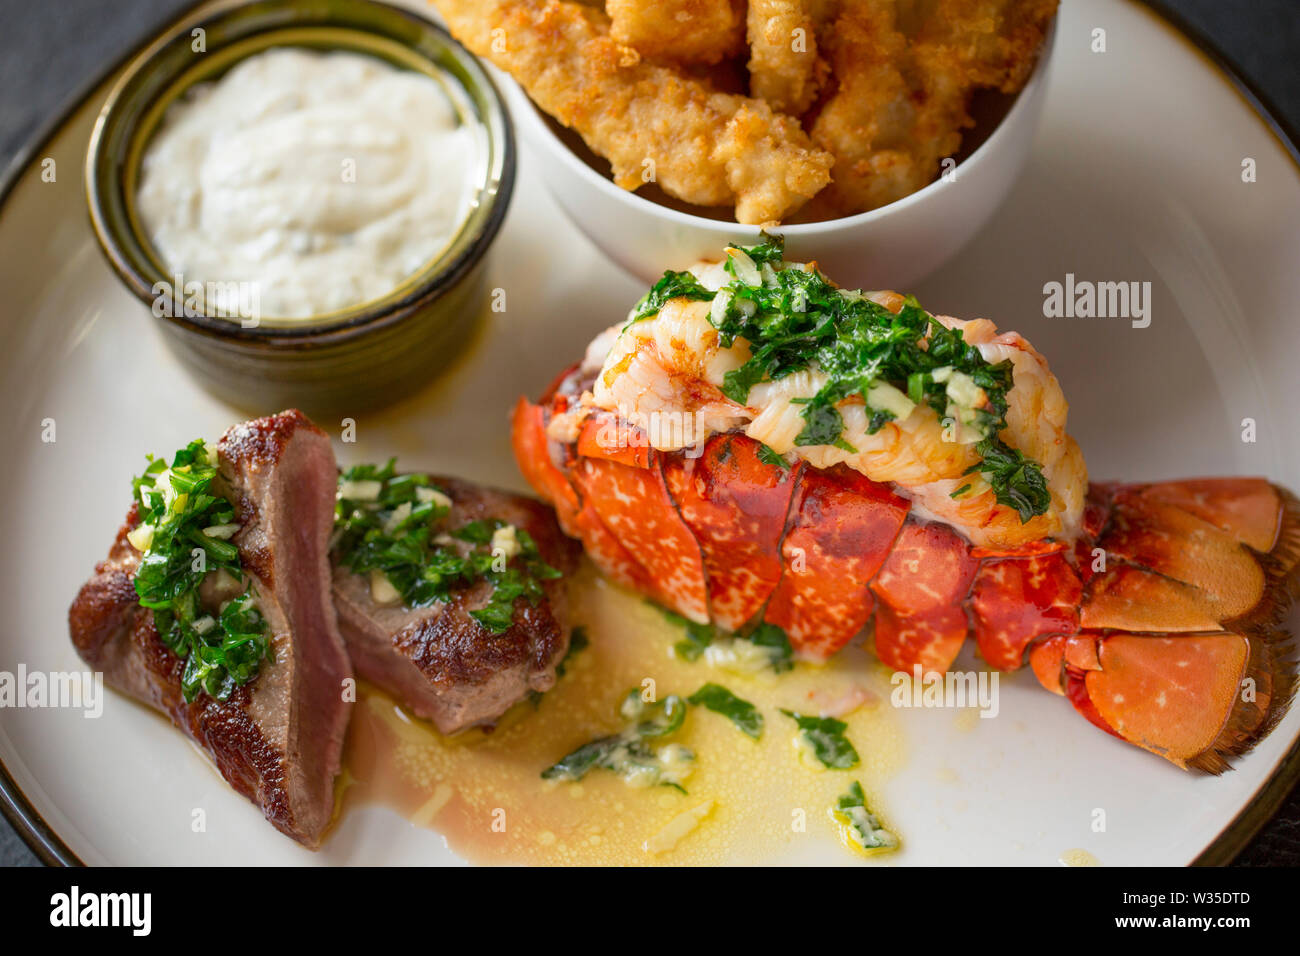 A homemade dish of surf and turf. It features a lobster tail that has been grilled, and a flash fried roe deer saddle fillet that have both had a garl Stock Photo